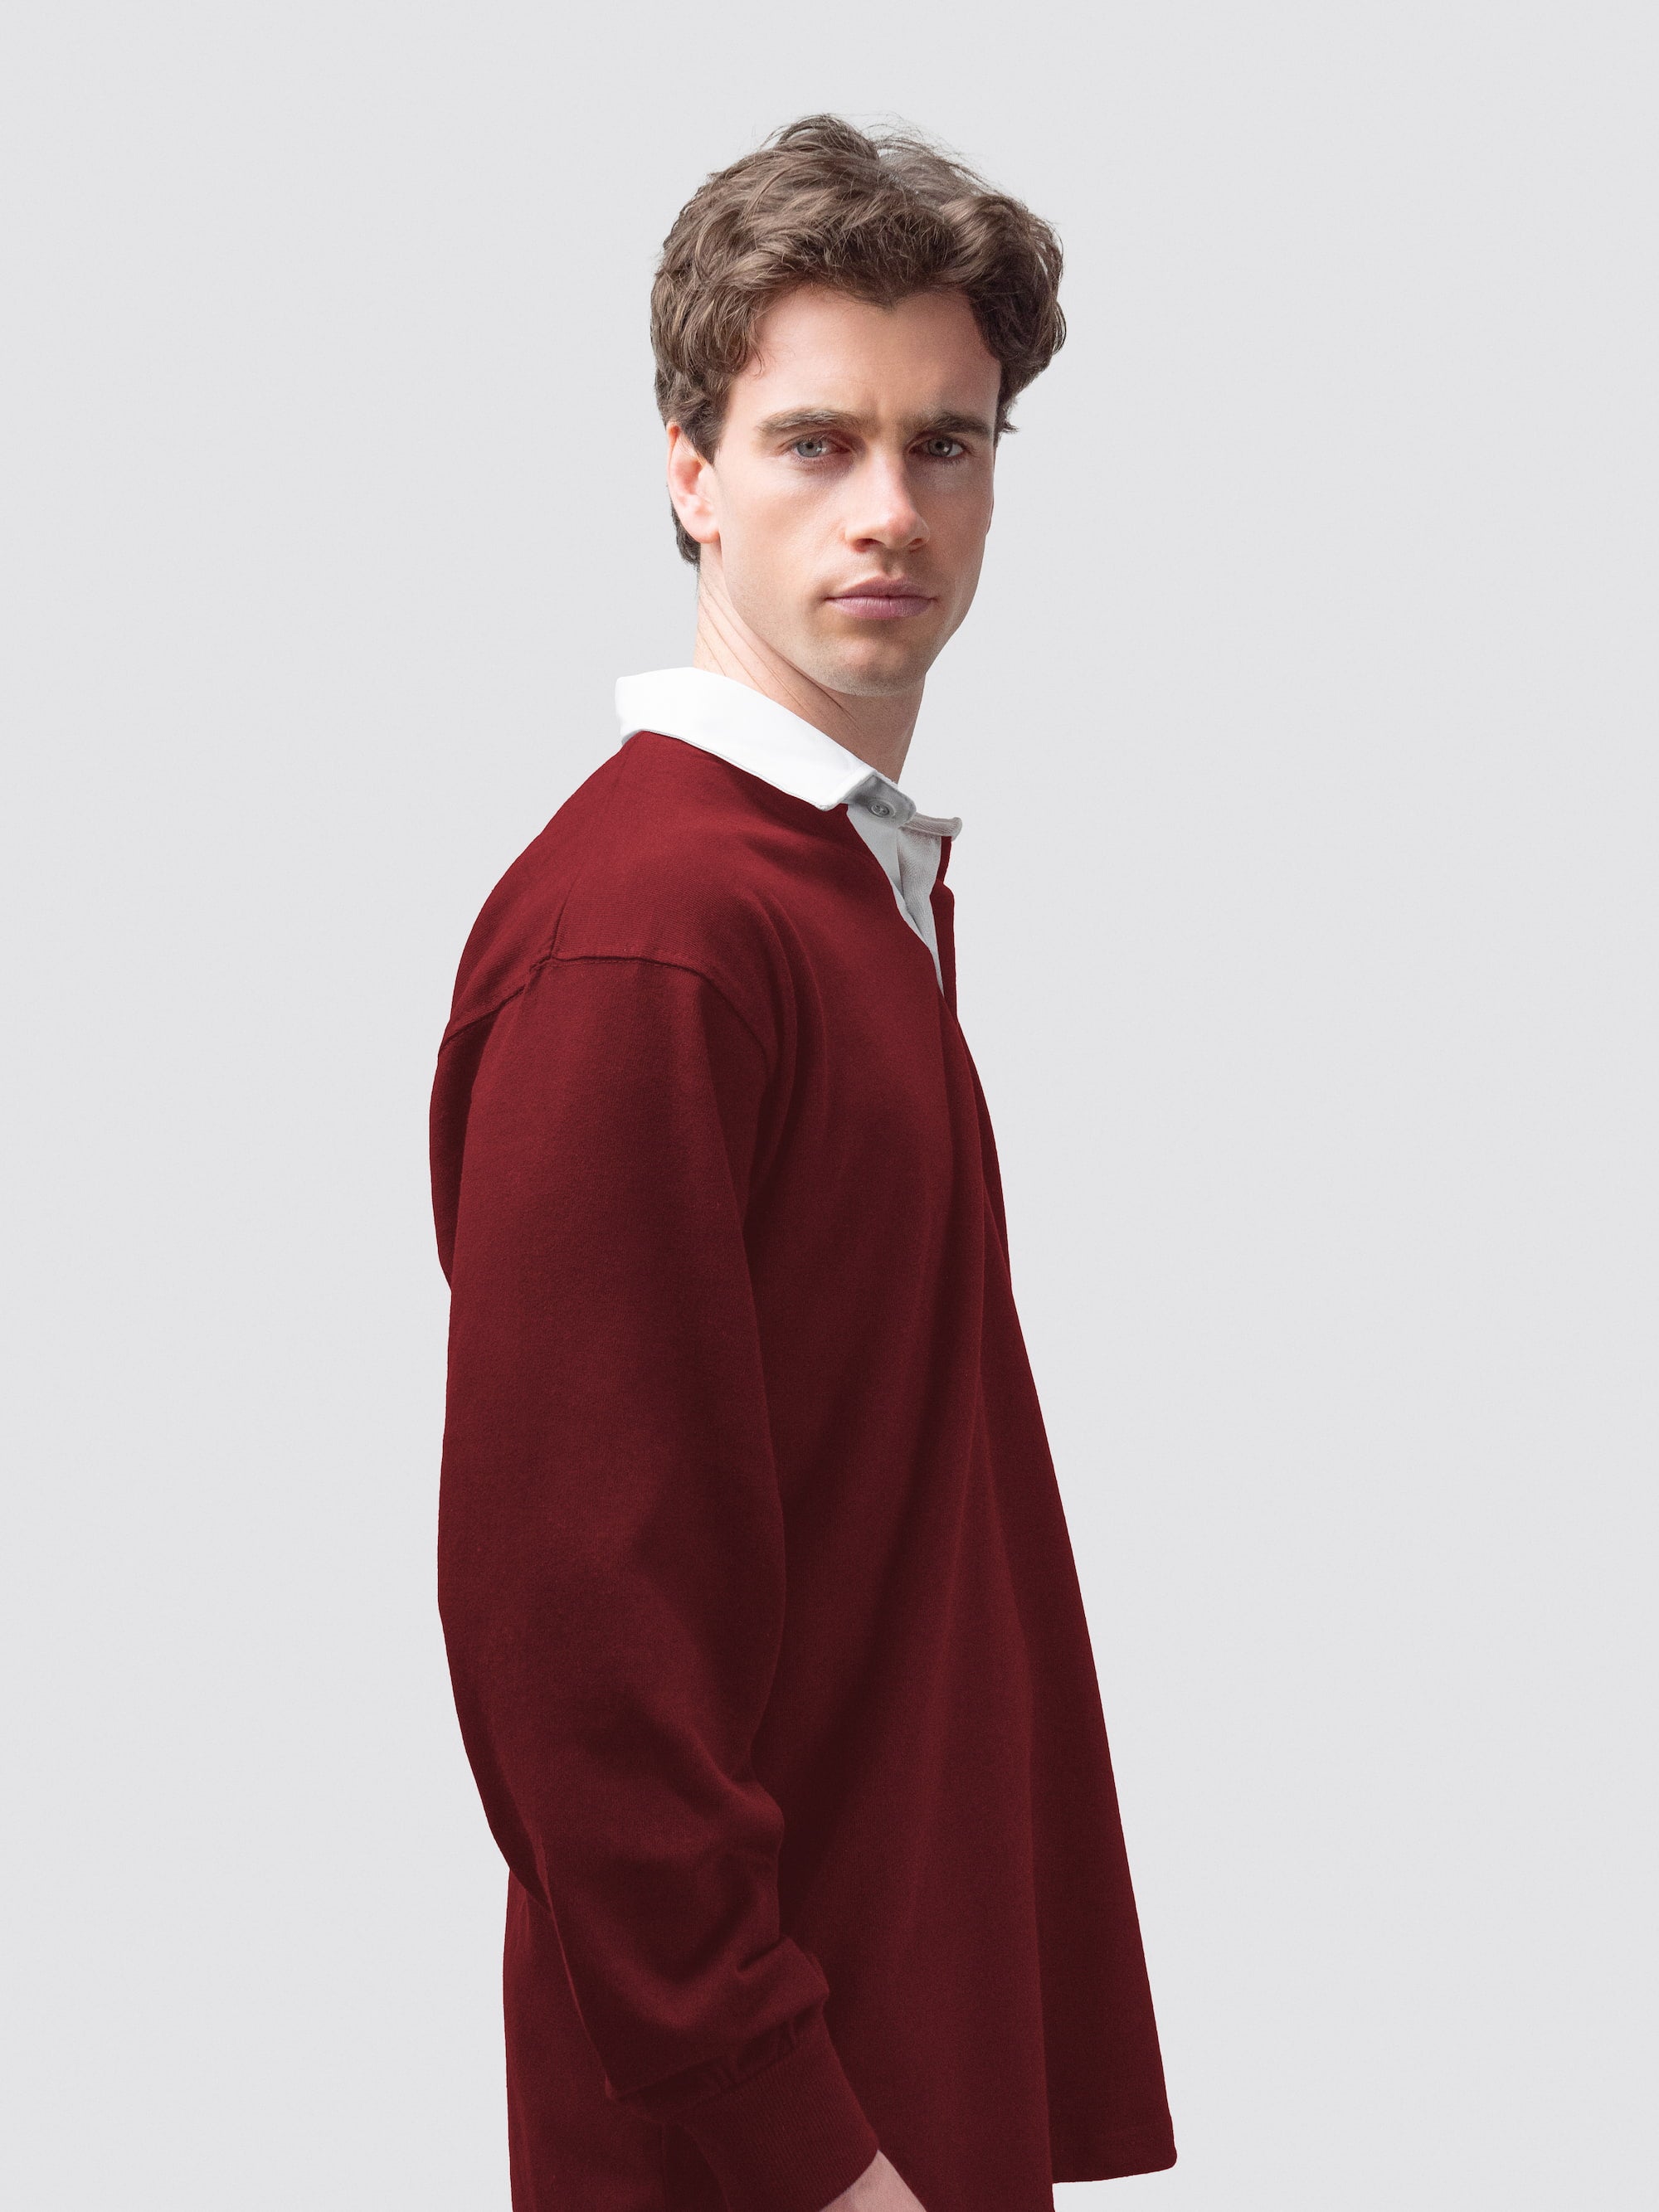 A deep burgundy, Oxford University rugby shirt with white contrast  collar